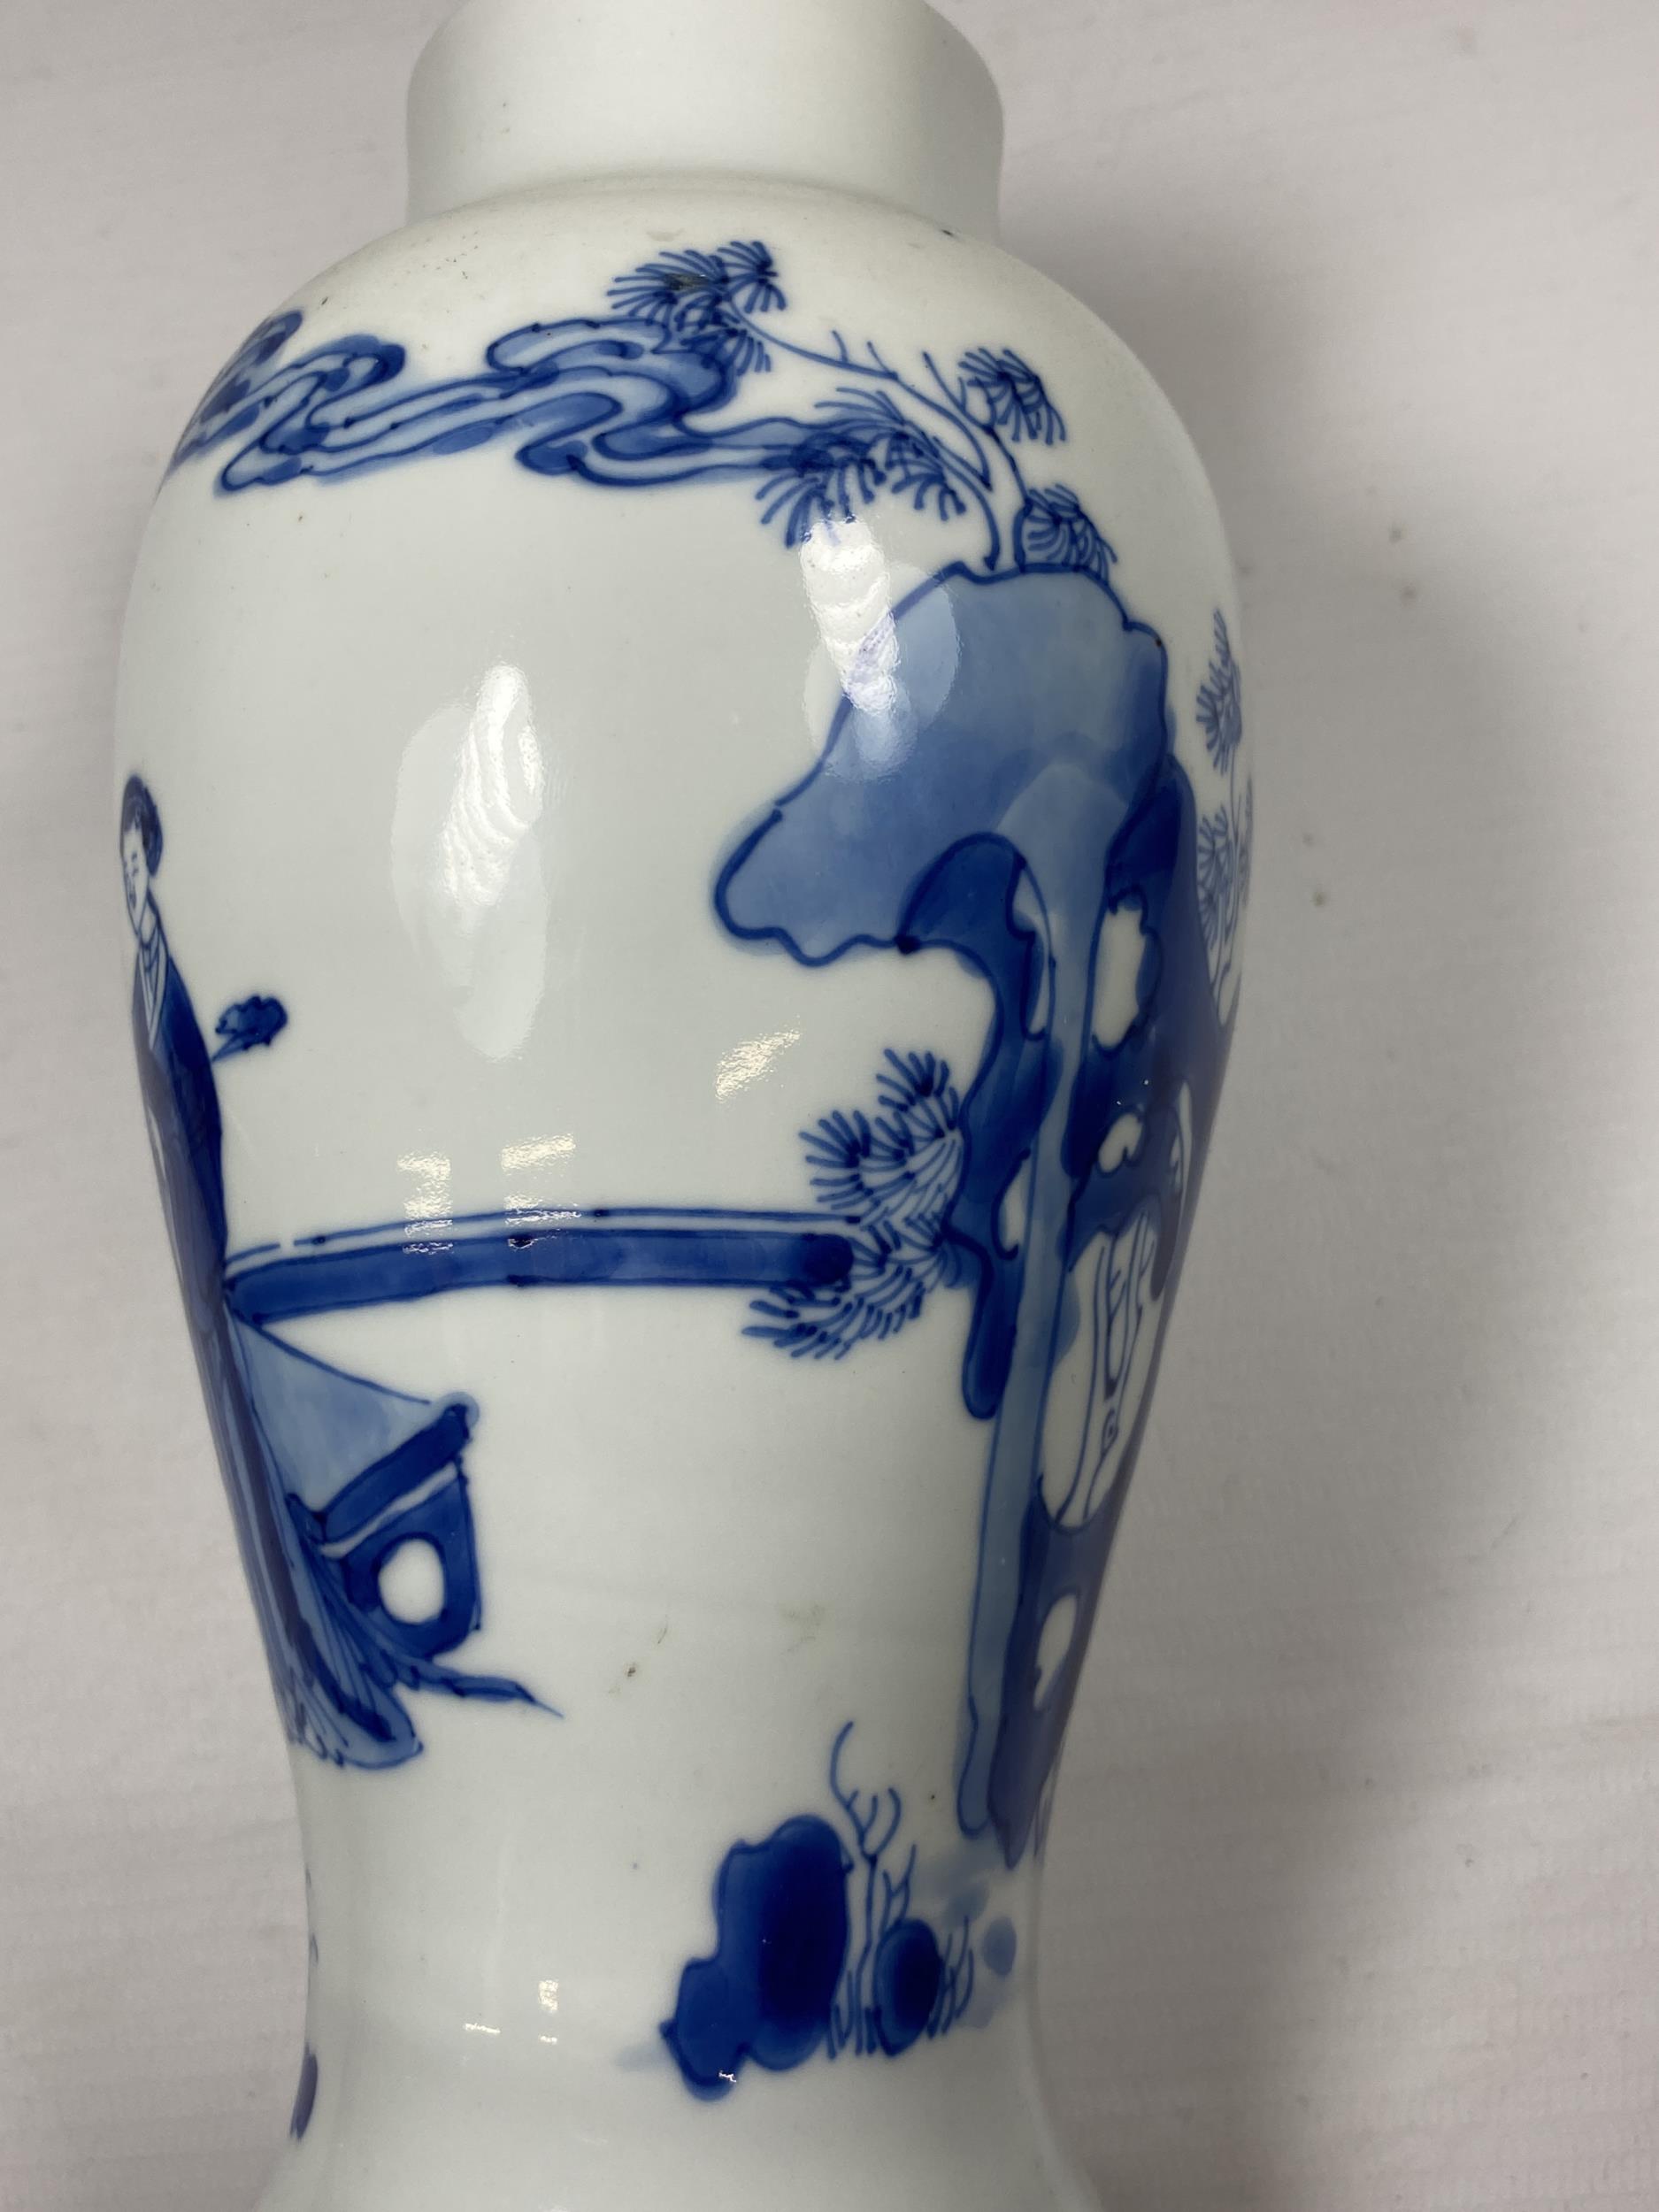 A CHINESE KANGXI PERIOD (1661-1722) BLUE AND WHITE PORCELAIN BALUSTER FORM VASE DEPICTING FIGURES IN - Image 3 of 7